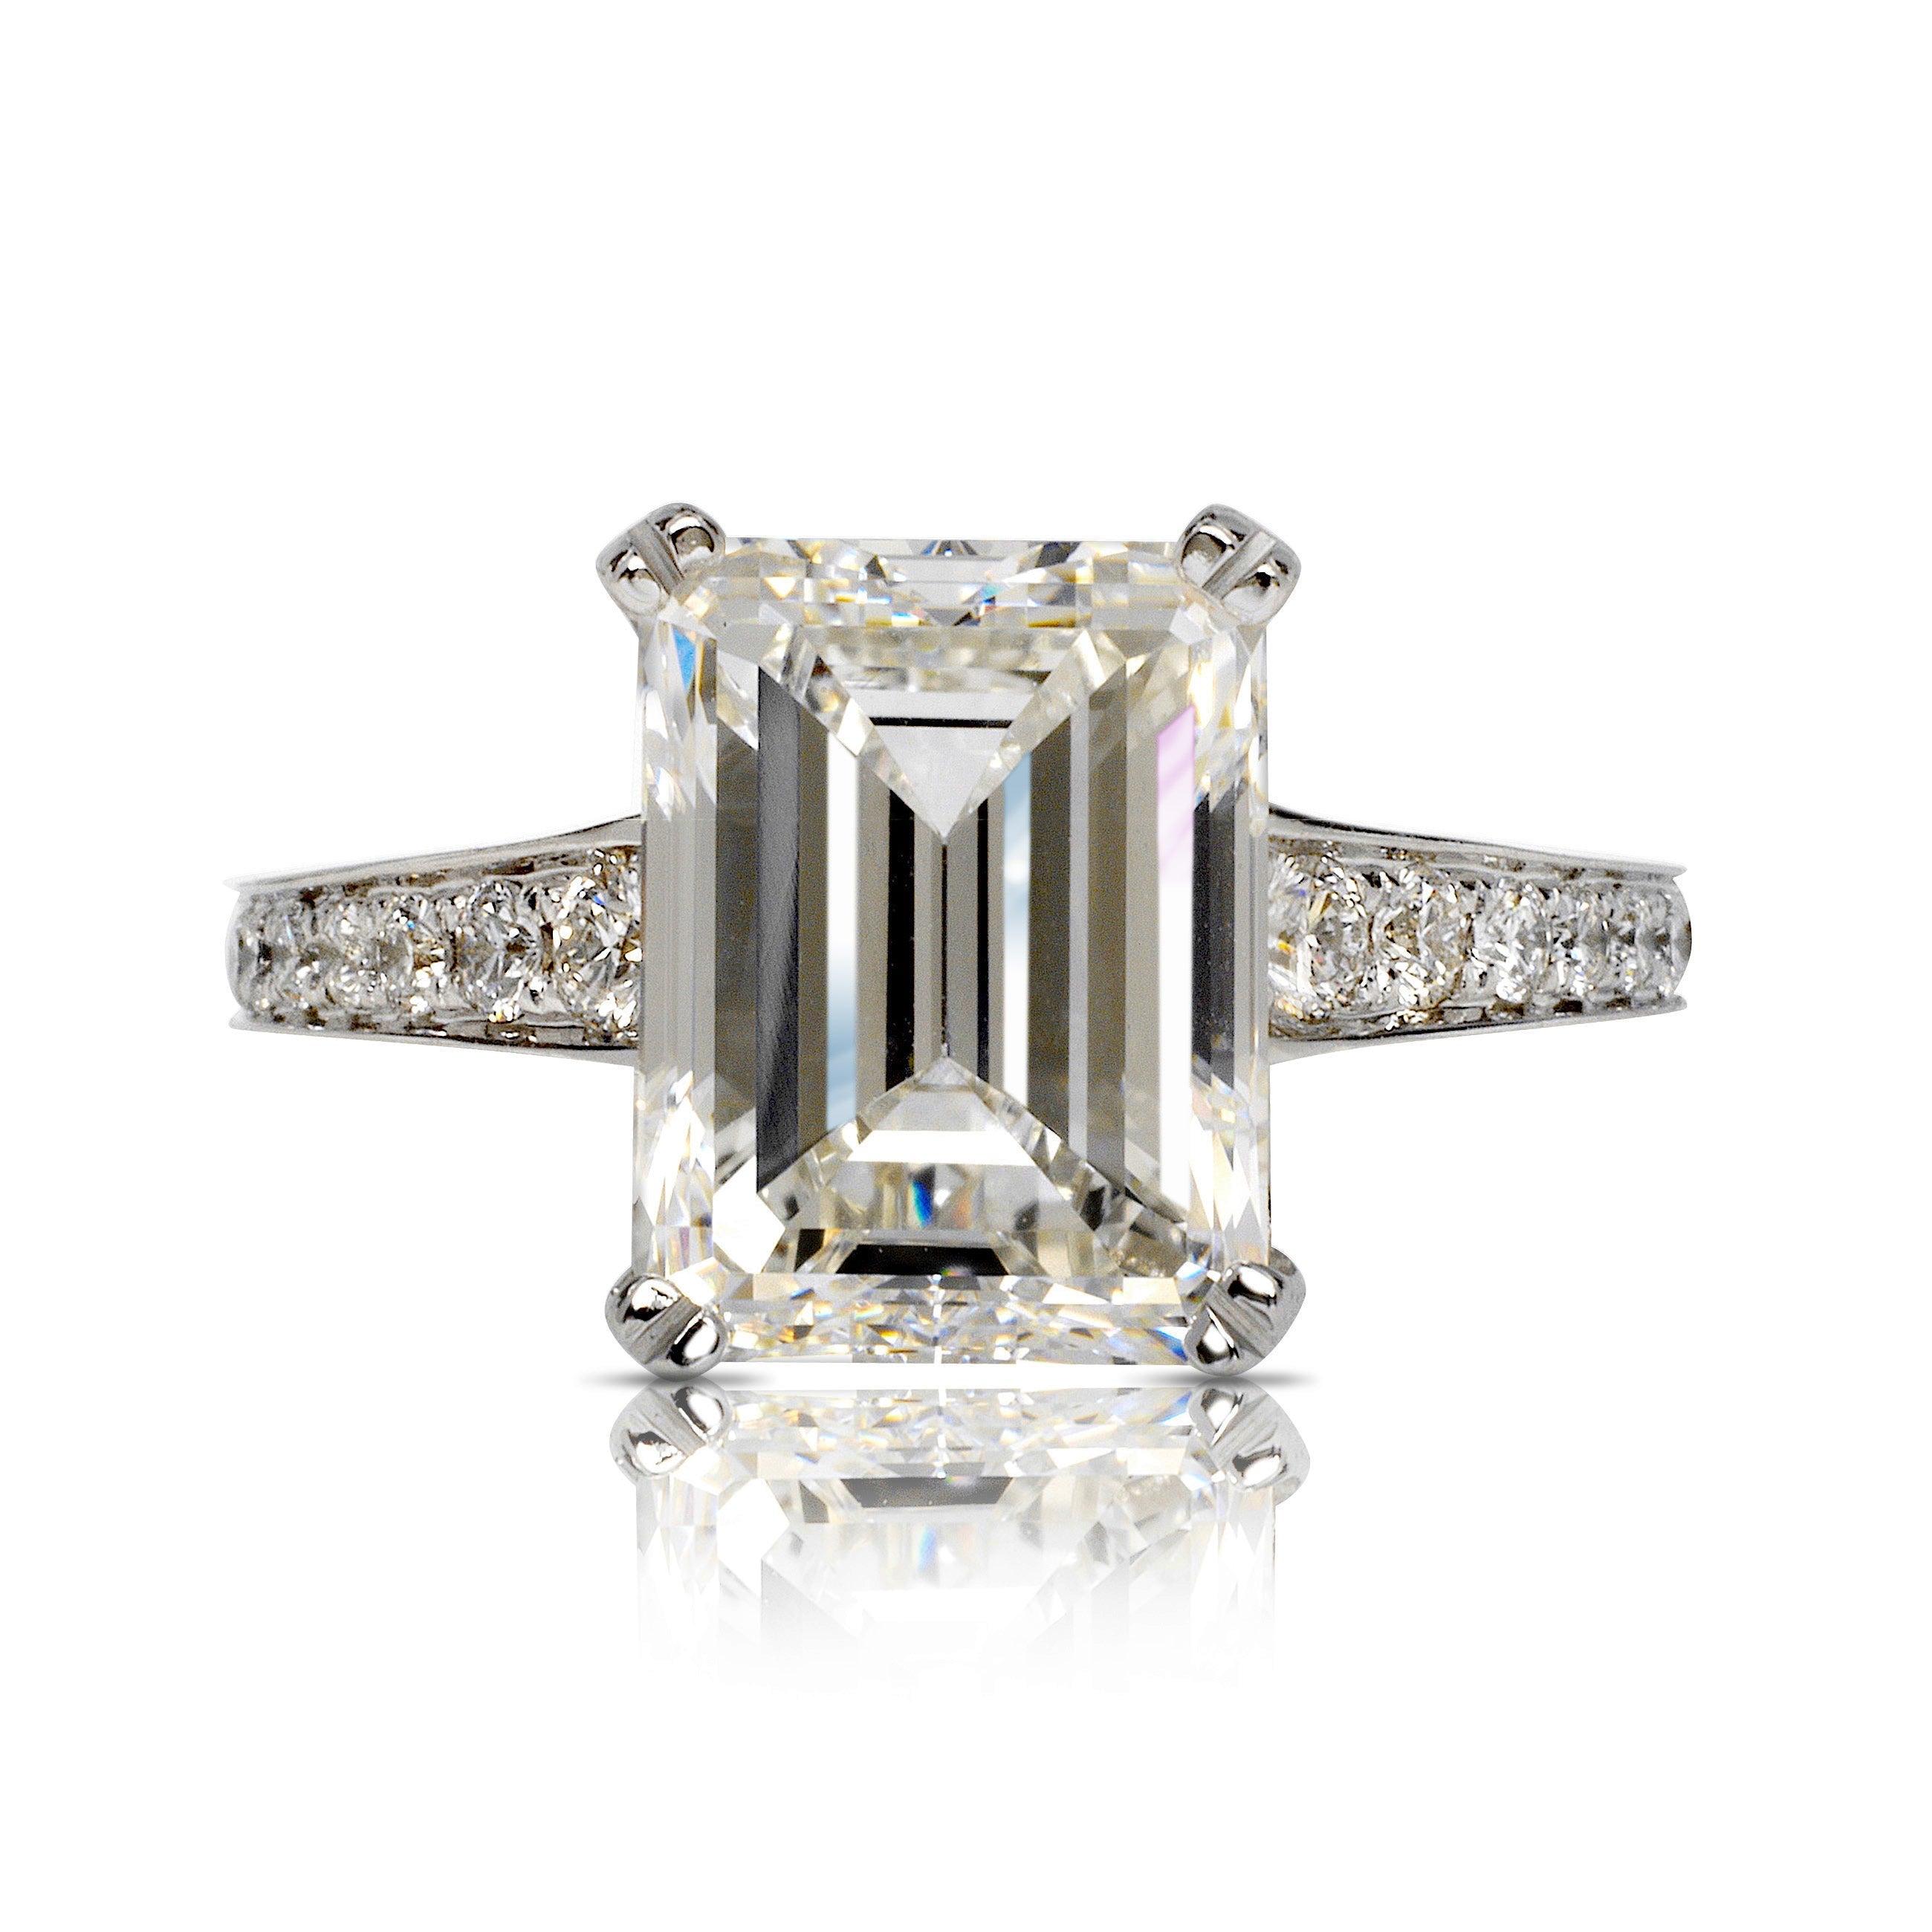 MERIDA EMERALD CUT DIAMOND ENGAGEMENT RING PLATINUM BY MIKE NEKTA

GIA CERTIDIED

Center Diamond:
Carat Weight: 5 Carats
Color :  H
Clarity: VVS2
Style:  
Measurement: 11.1 x 8.5 x 5.6 mm

Ring:
Metal: 18K WHITE GOLD
Diamonds:  0,50 ct
Size: Can be